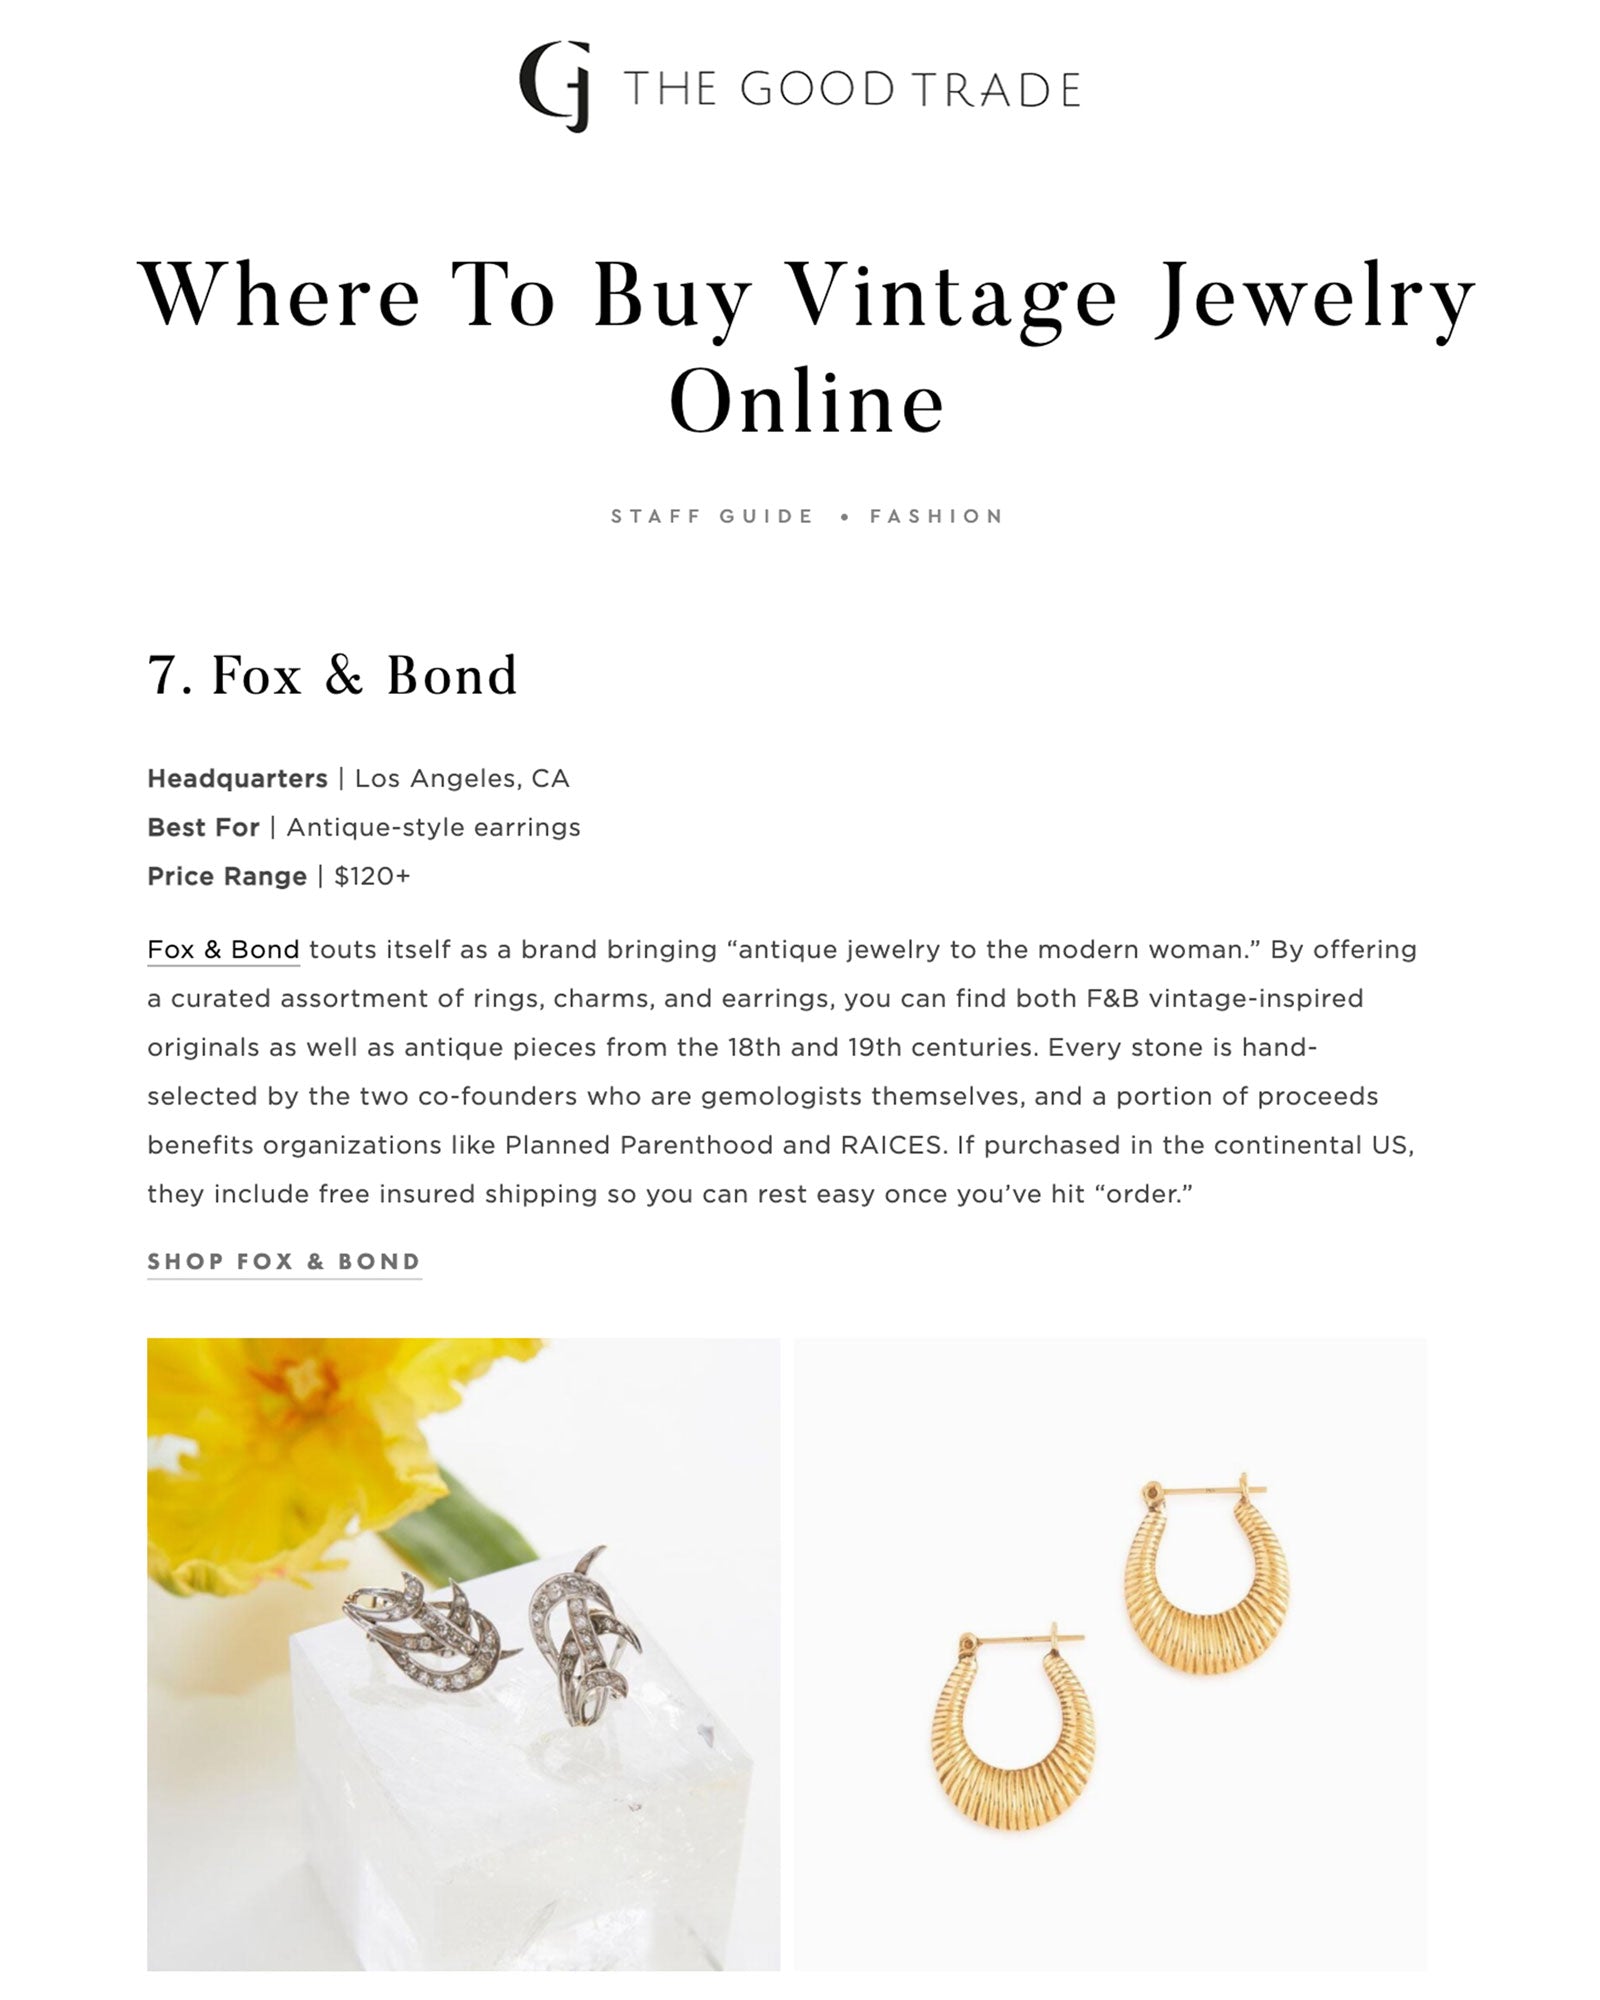 The Good Trade: Where To Buy Vintage Jewelry Online